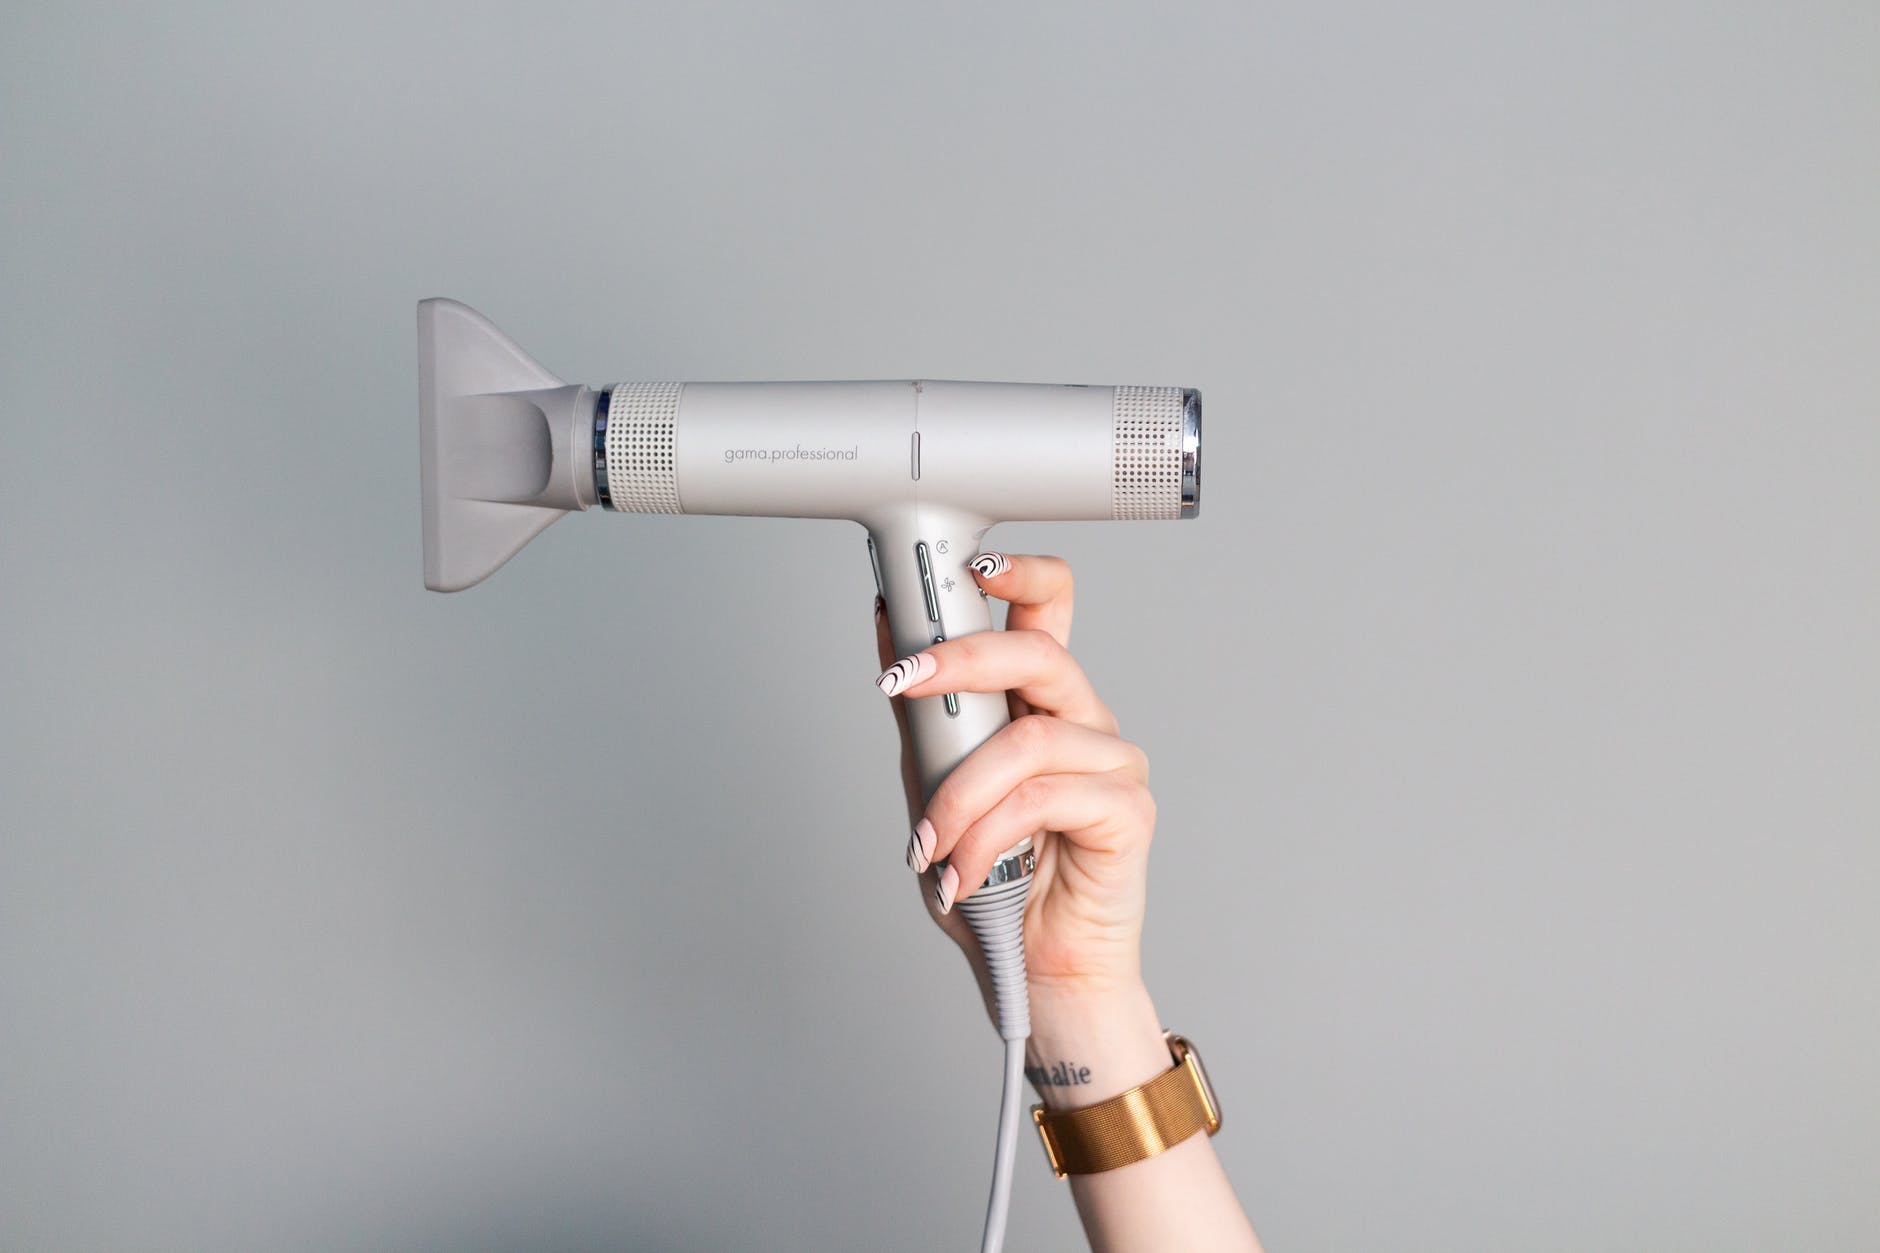 close up shot of a person holding a blow dryer